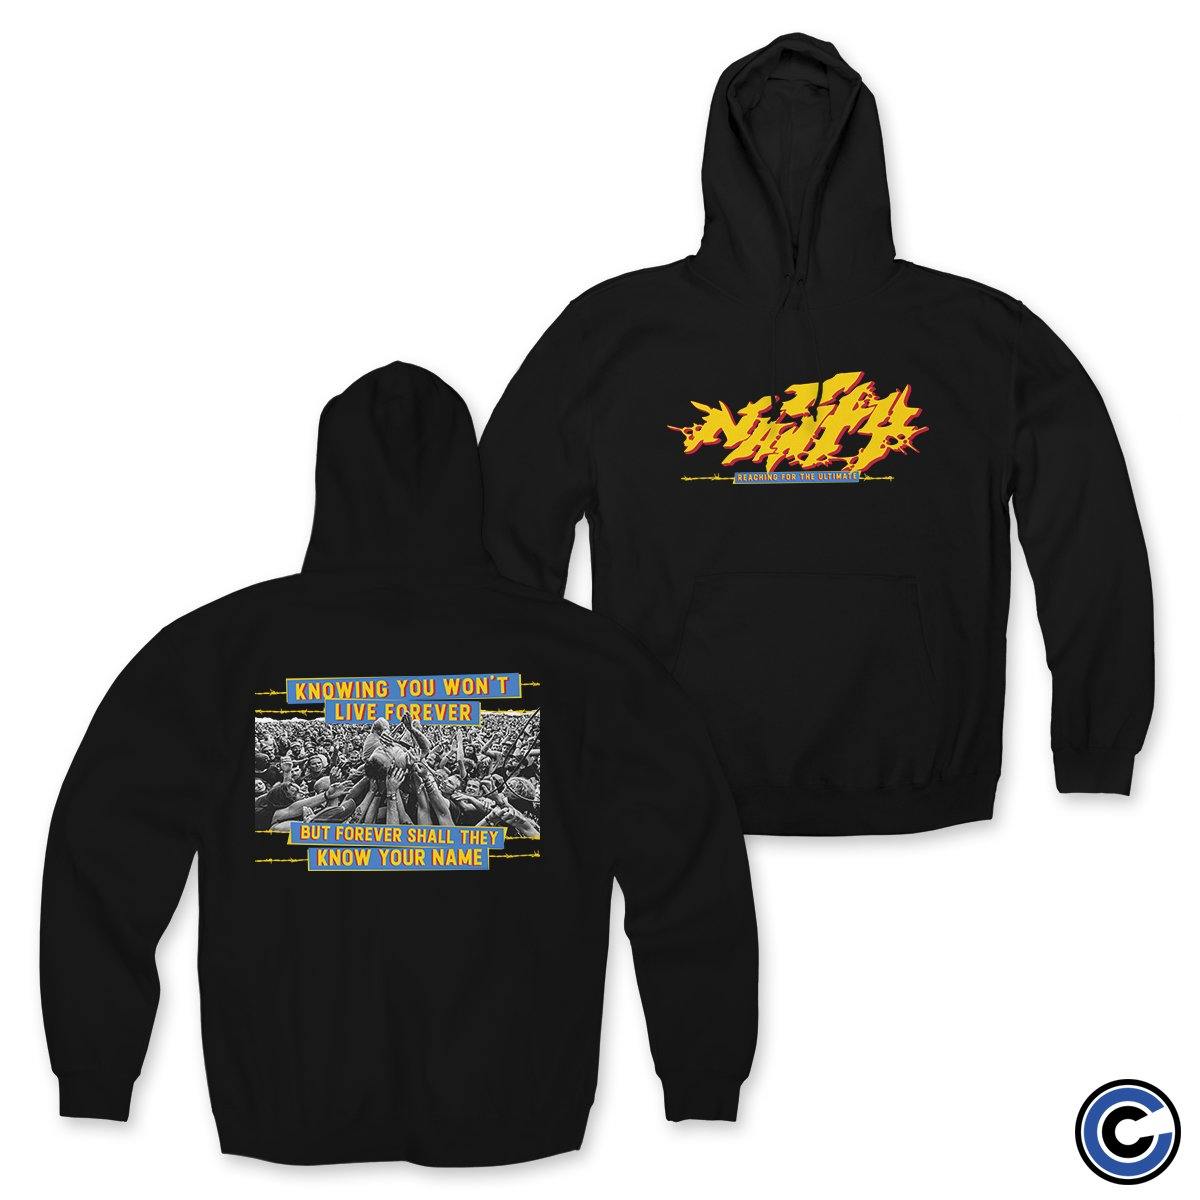 Buy – Nasty "Know Your Name" Hoodie – Band & Music Merch – Cold Cuts Merch